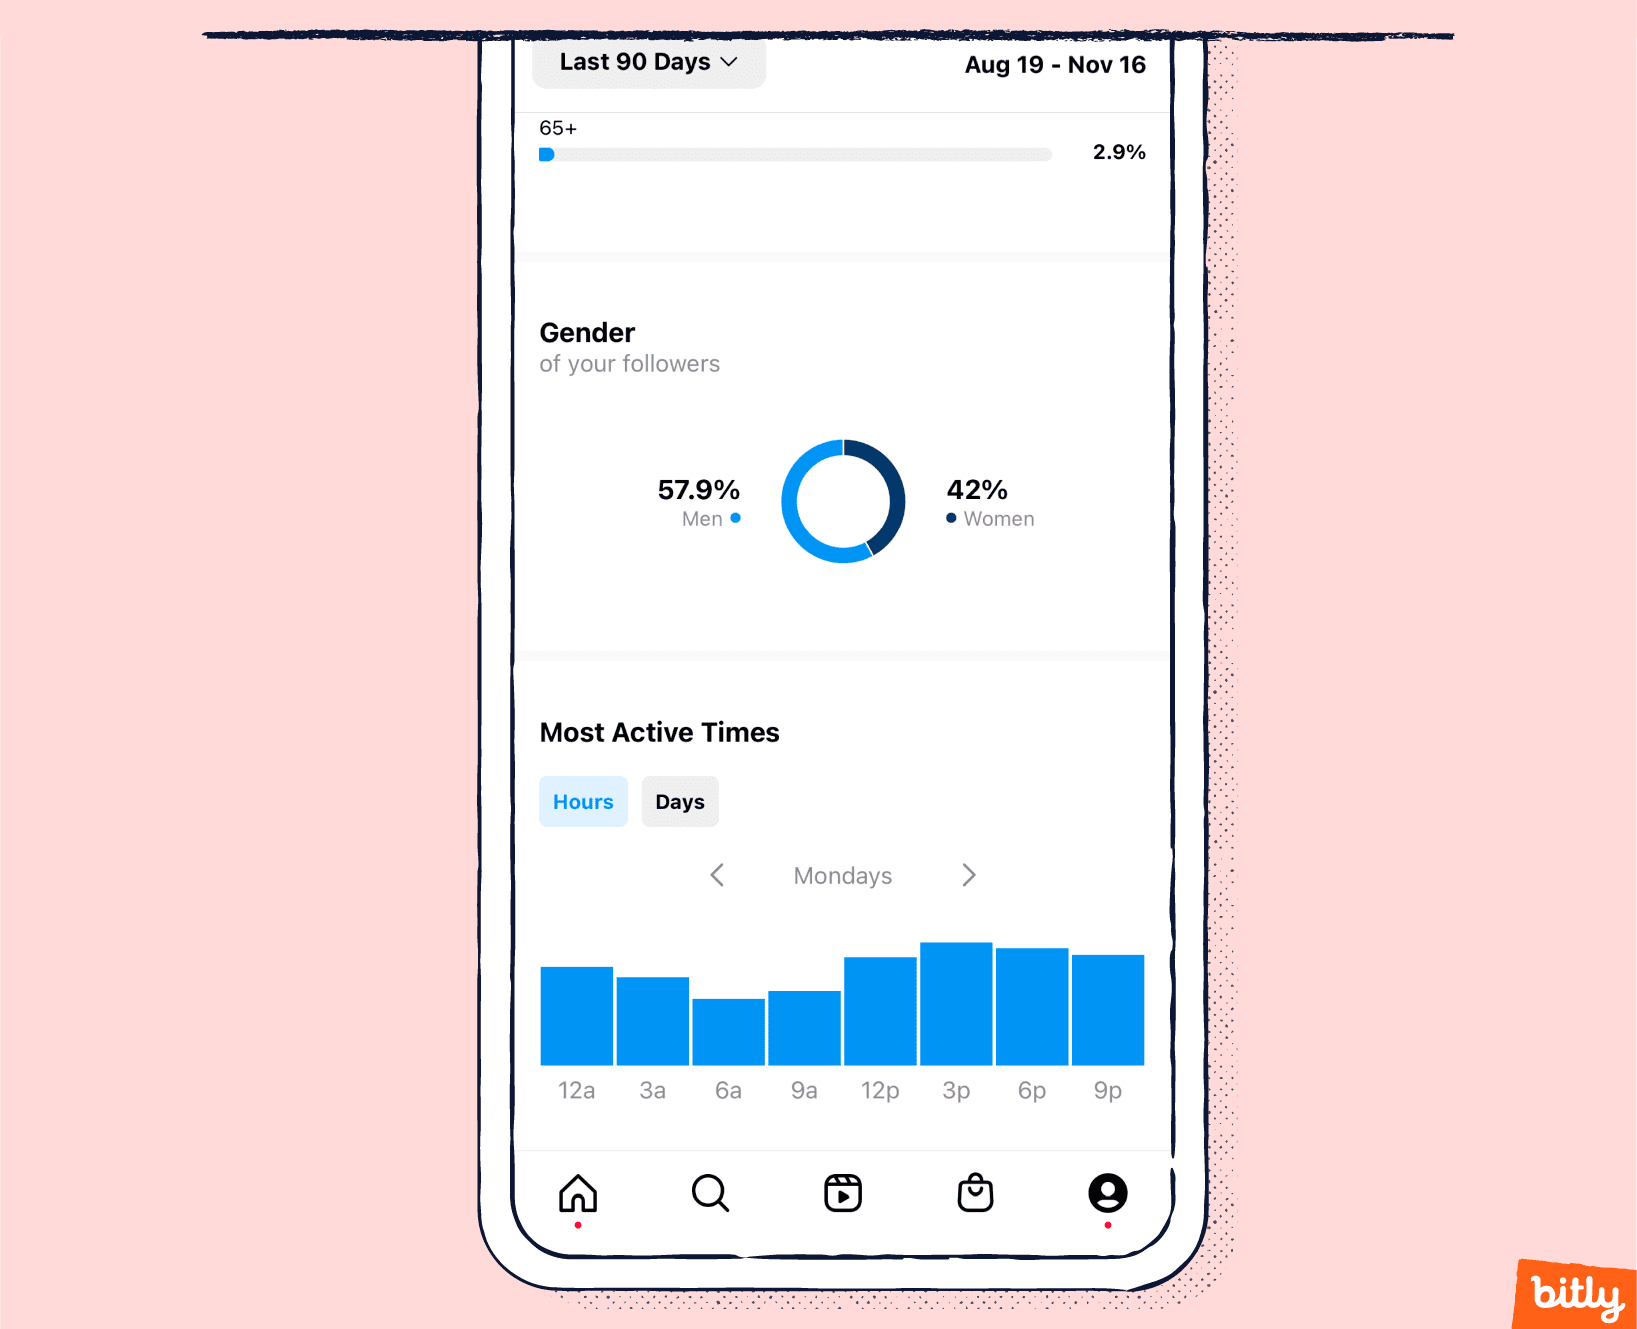 The genders and active times of users on Instagram analytics displayed on a smartphone.